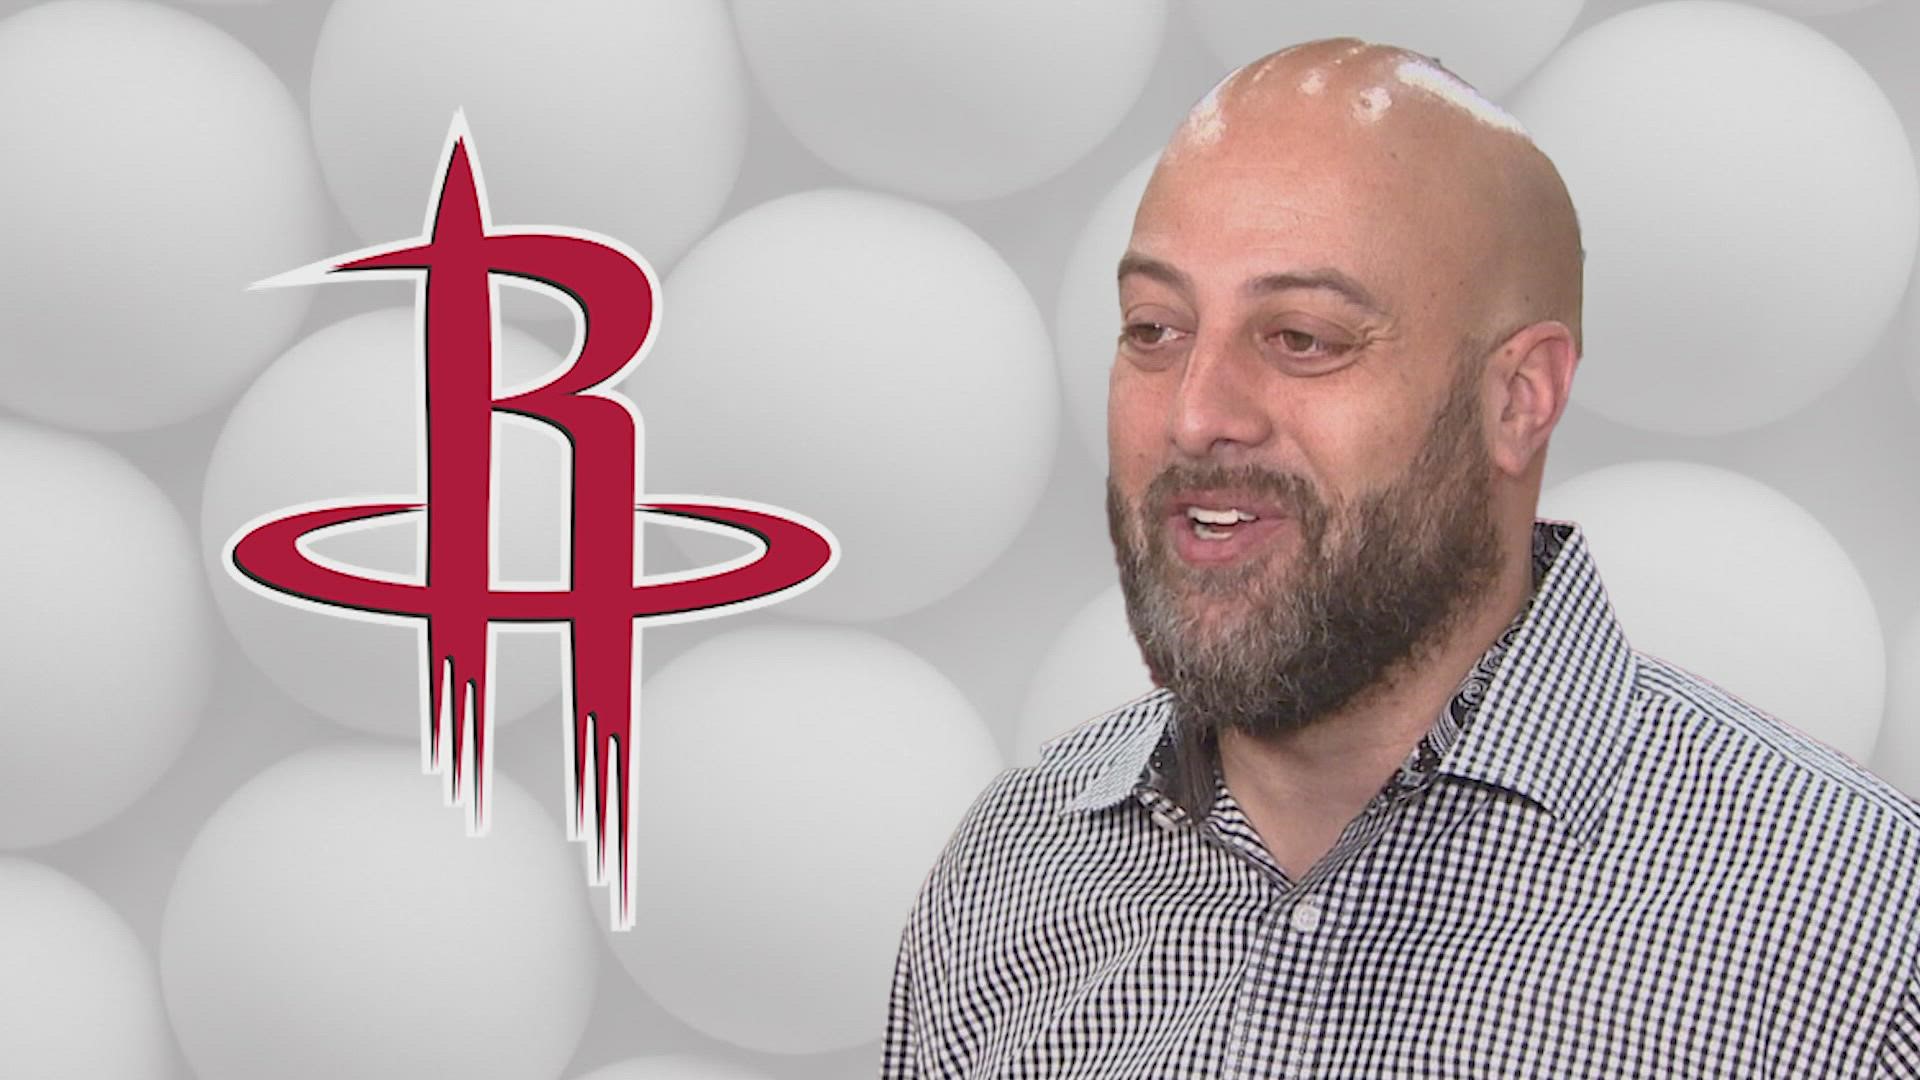 Representing the Rockets at Tuesday night's NBA draft lottery in Chicago will be general manager Rafel Stone. The Rockets will receive no worse than a top-5 pick.